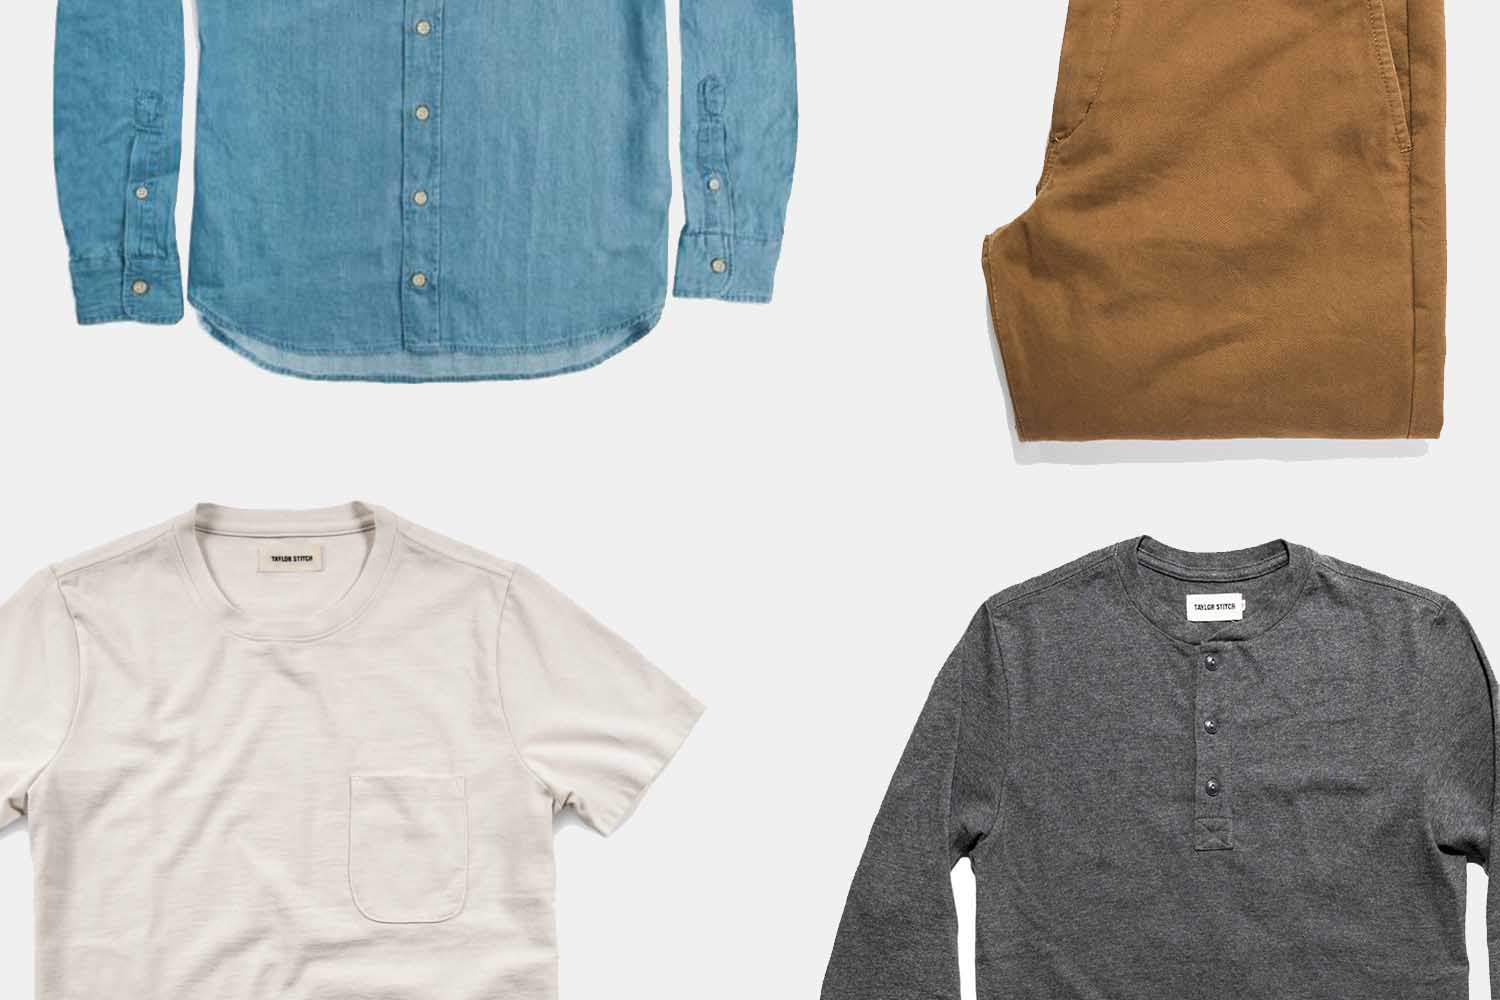 Deal: Taylor Stitch Is Taking up to 30% Off Its Best-Selling Items